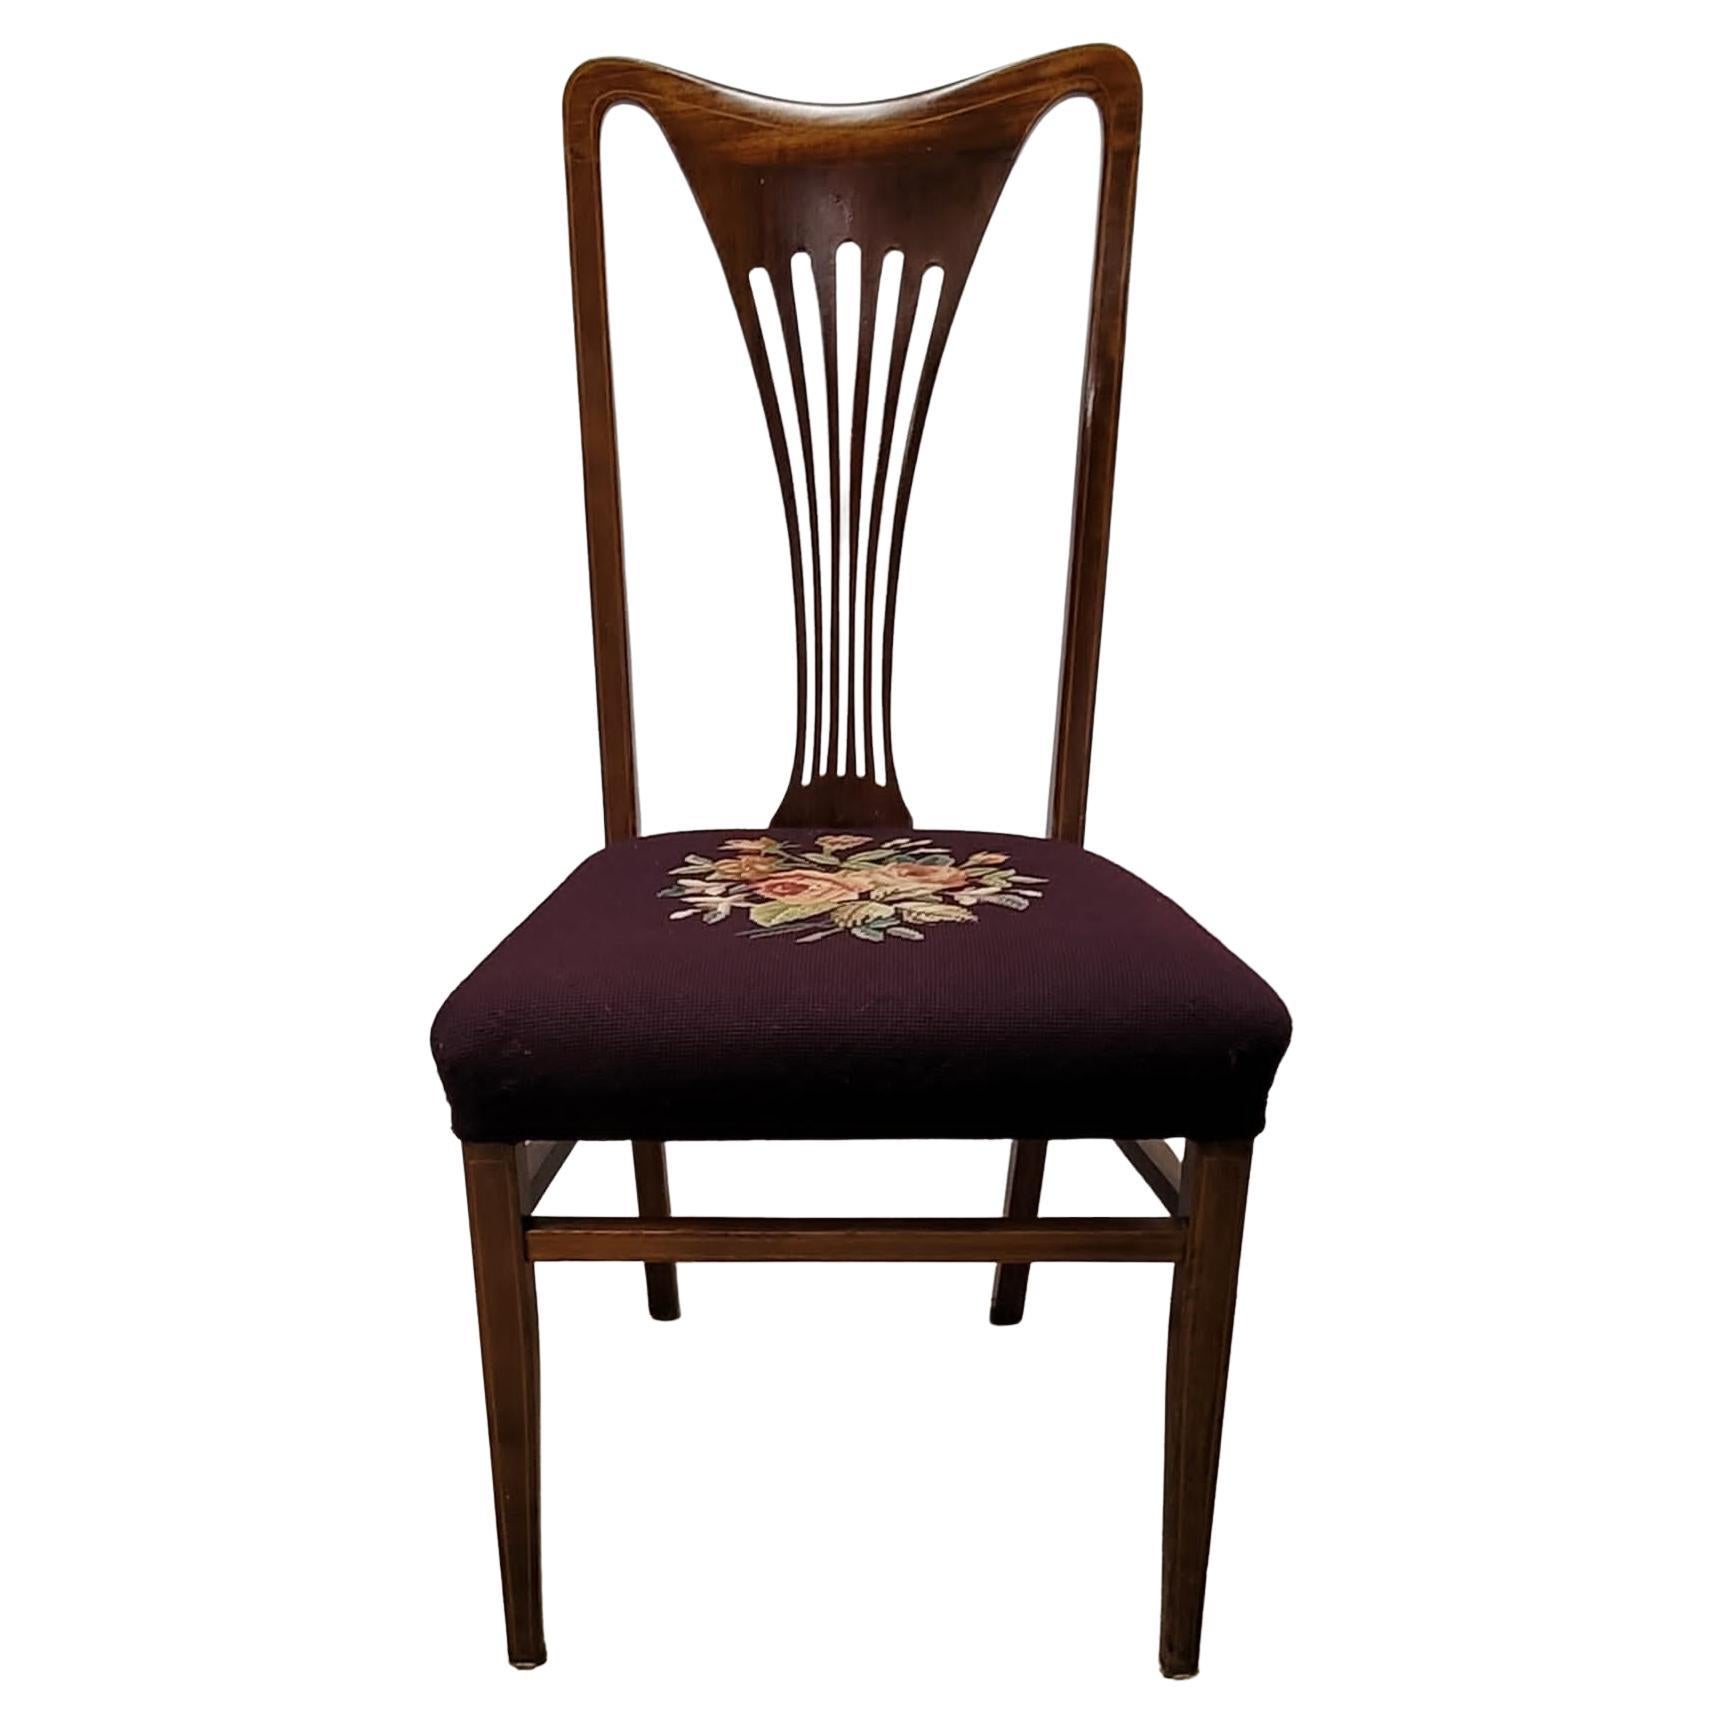 Vintage American Mahogany and Inlay Needlepoint Upholstered Chair For Sale 1